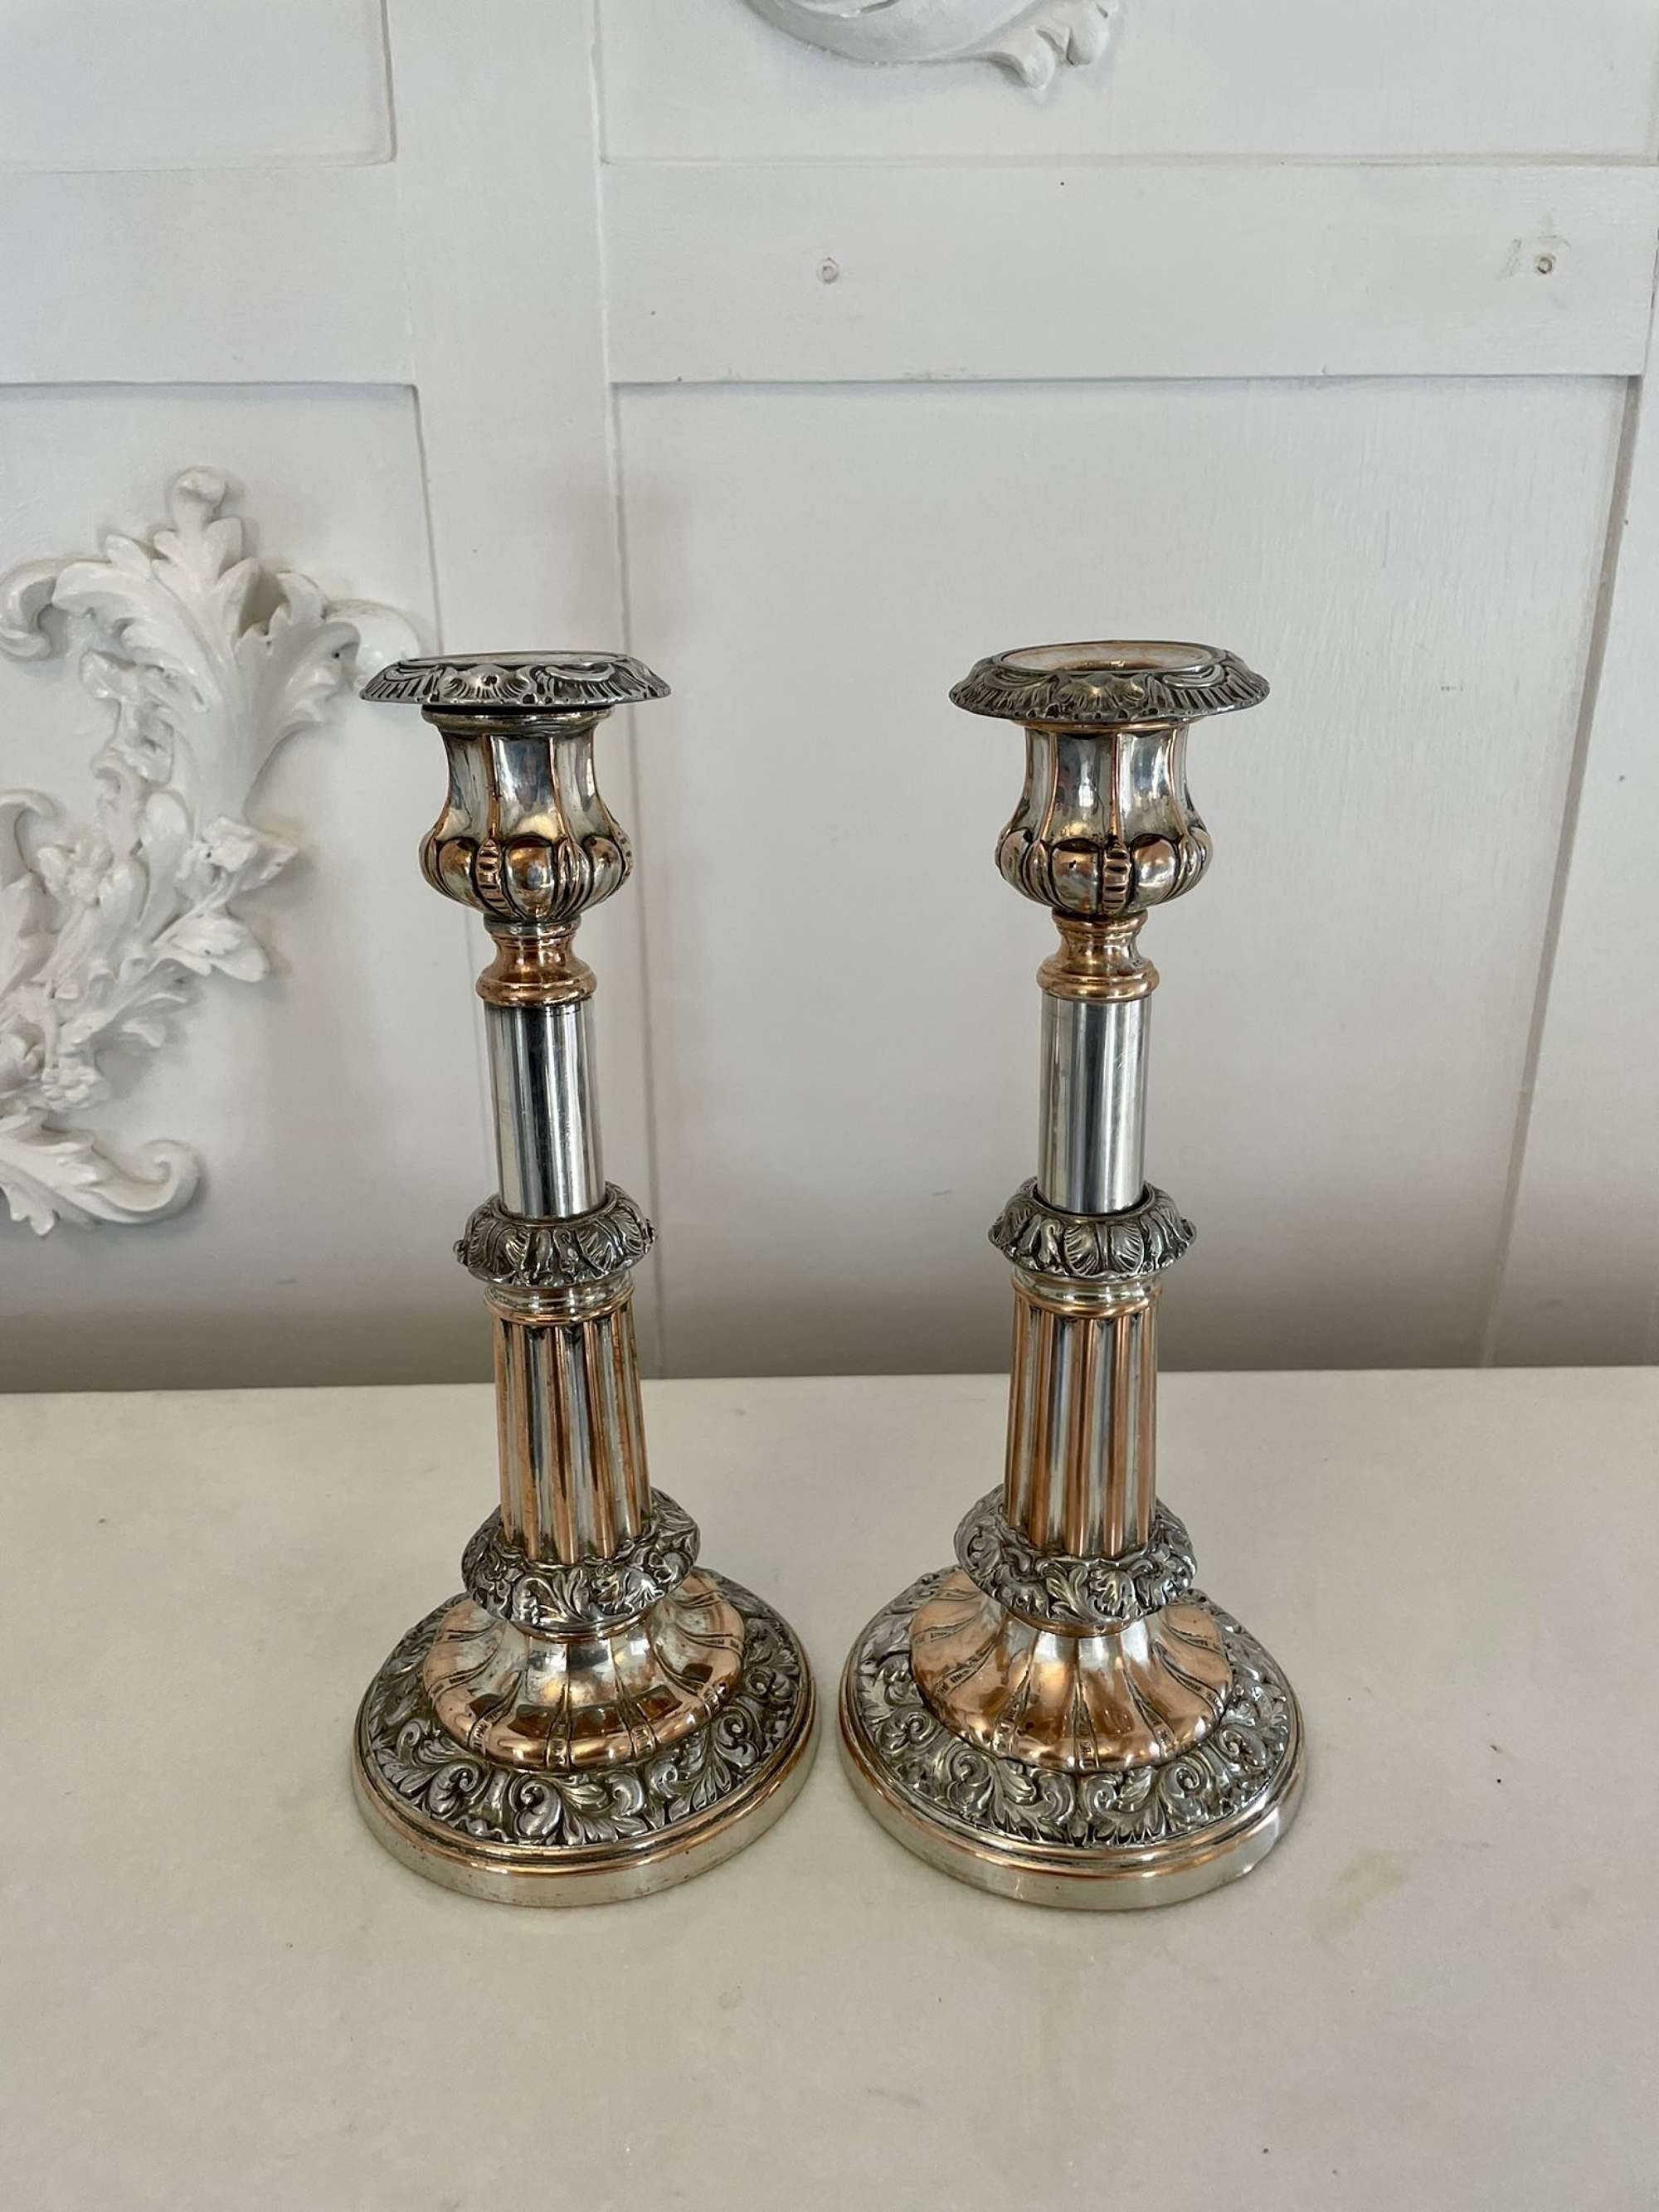 Unusual Pair Of Antique George Iii Quality Sheffield Plated Telescopic Candlesticks